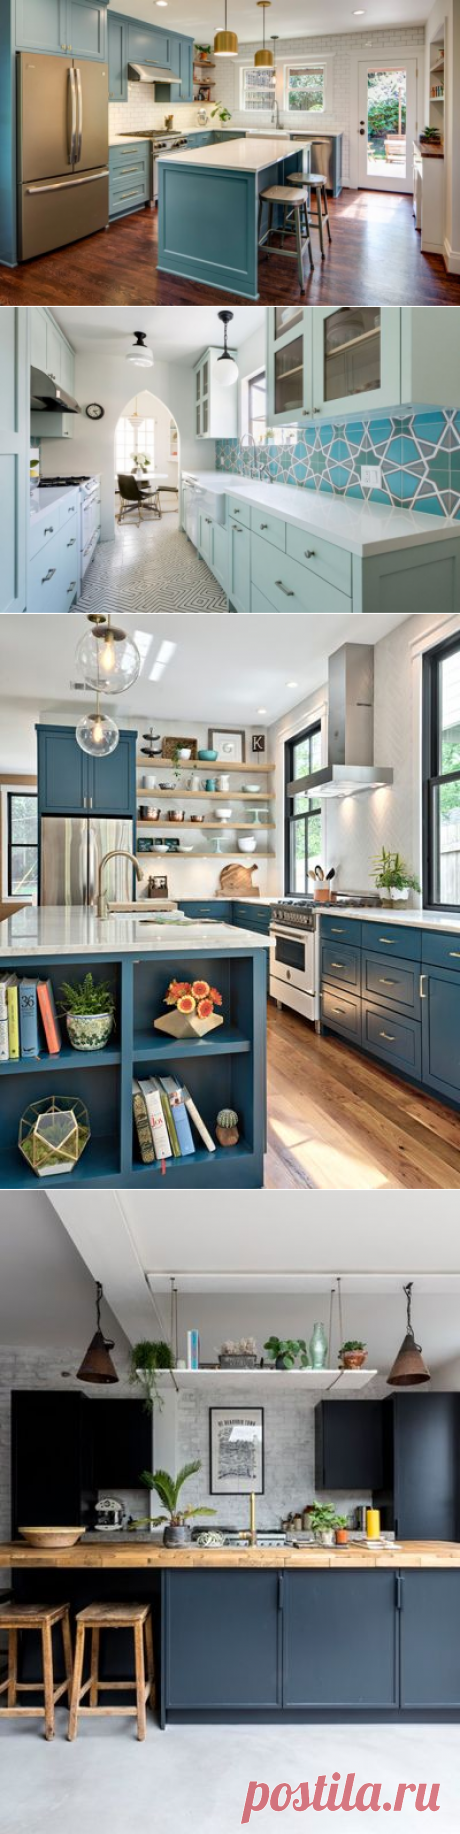 Is This the Year Blue and Green Kitchen Cabinets Edge Out White?